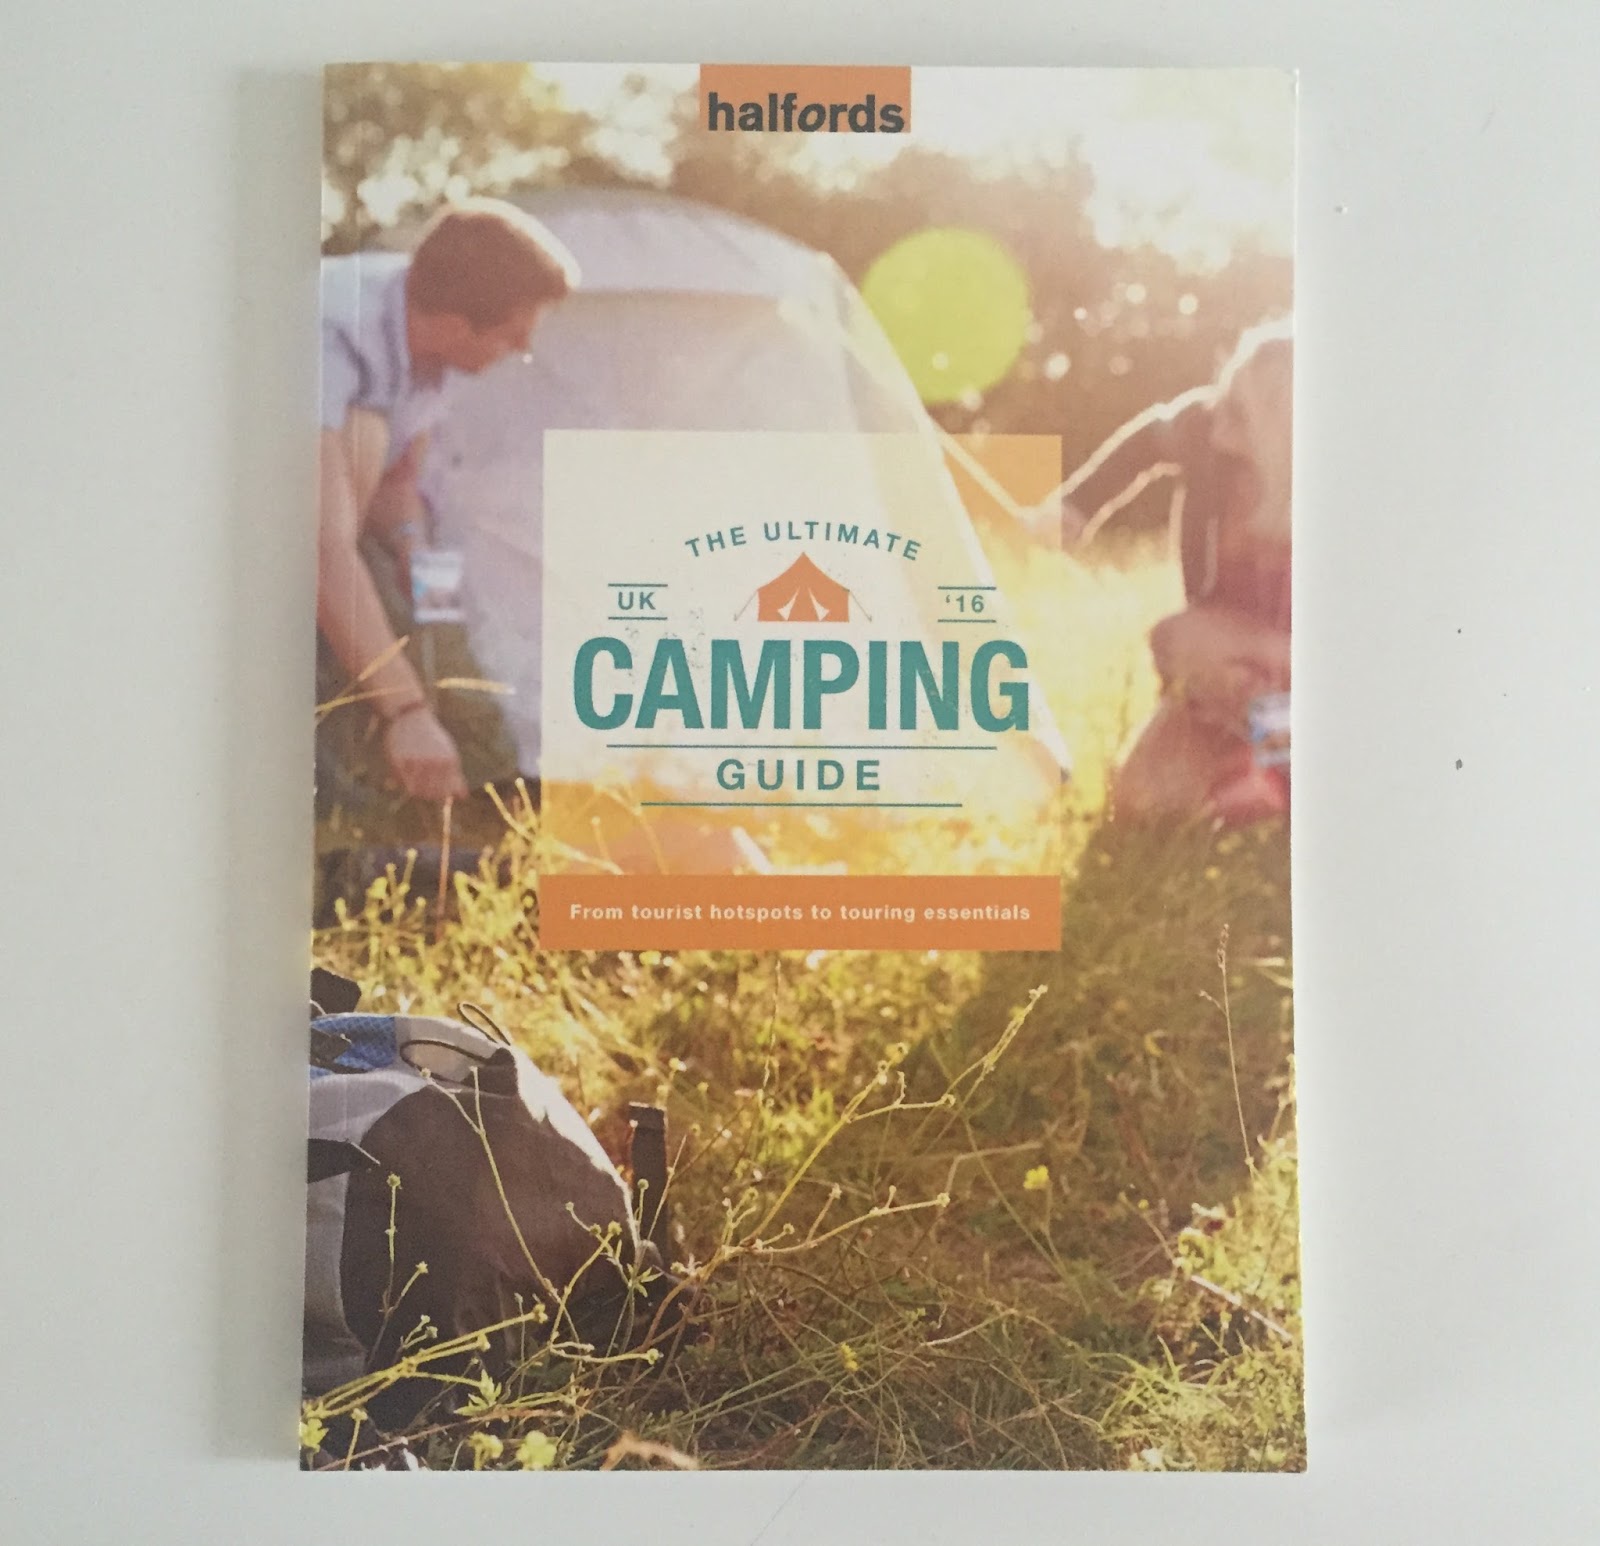 Camping With Kids - Our Top 5 Tips - Halfords Camping Guide